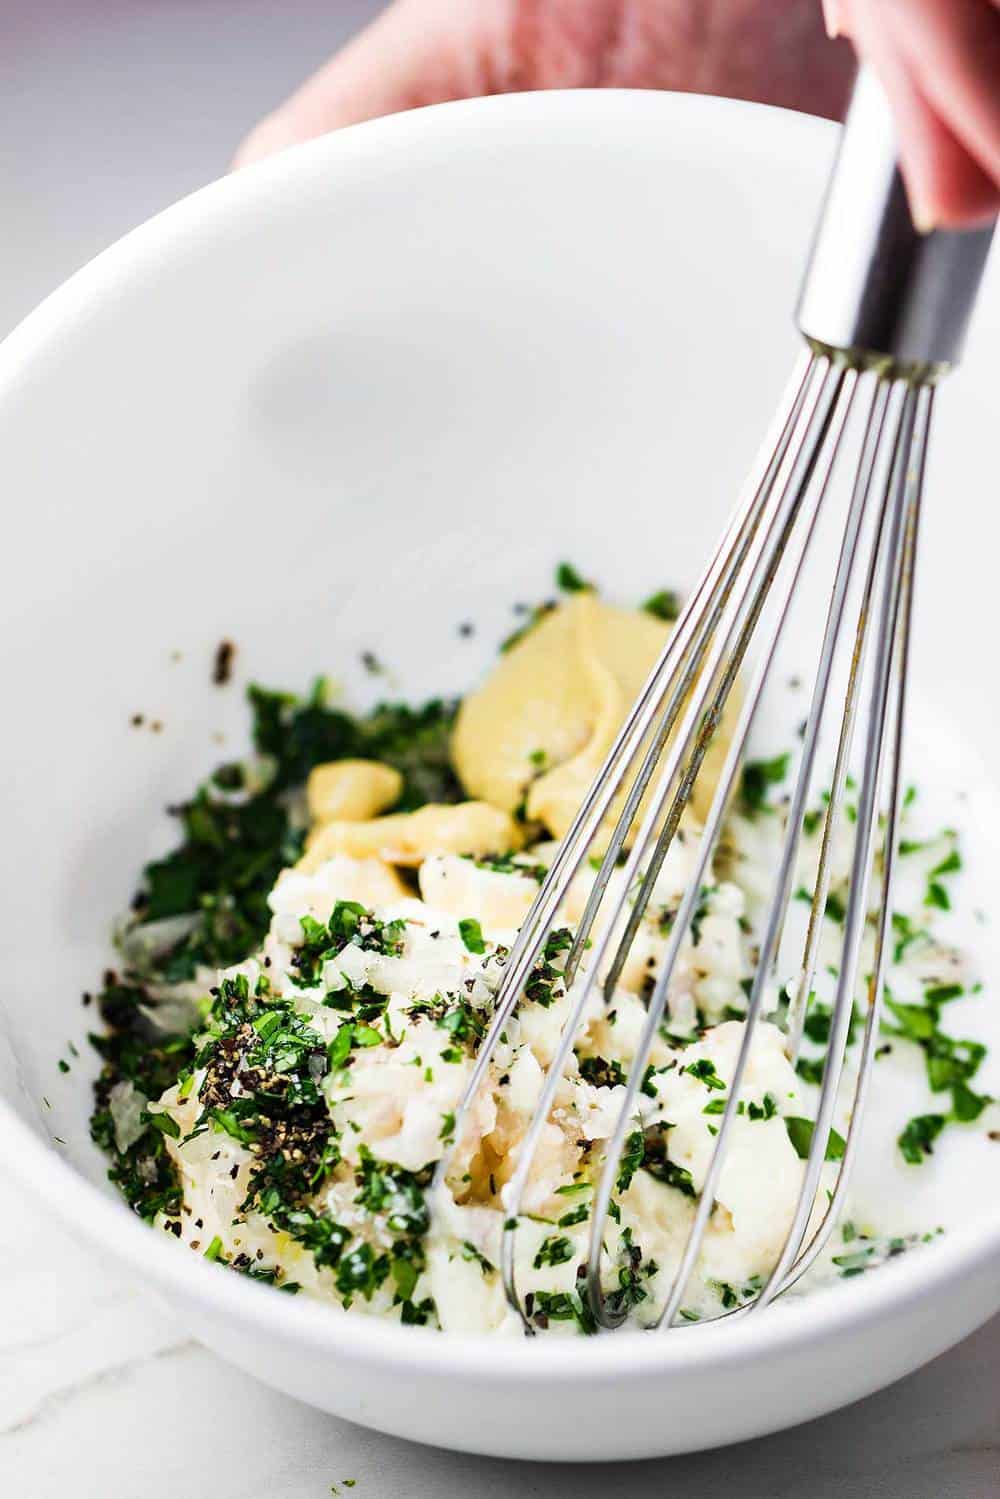 A white bowl filed with egg salad ingredients and a whisk